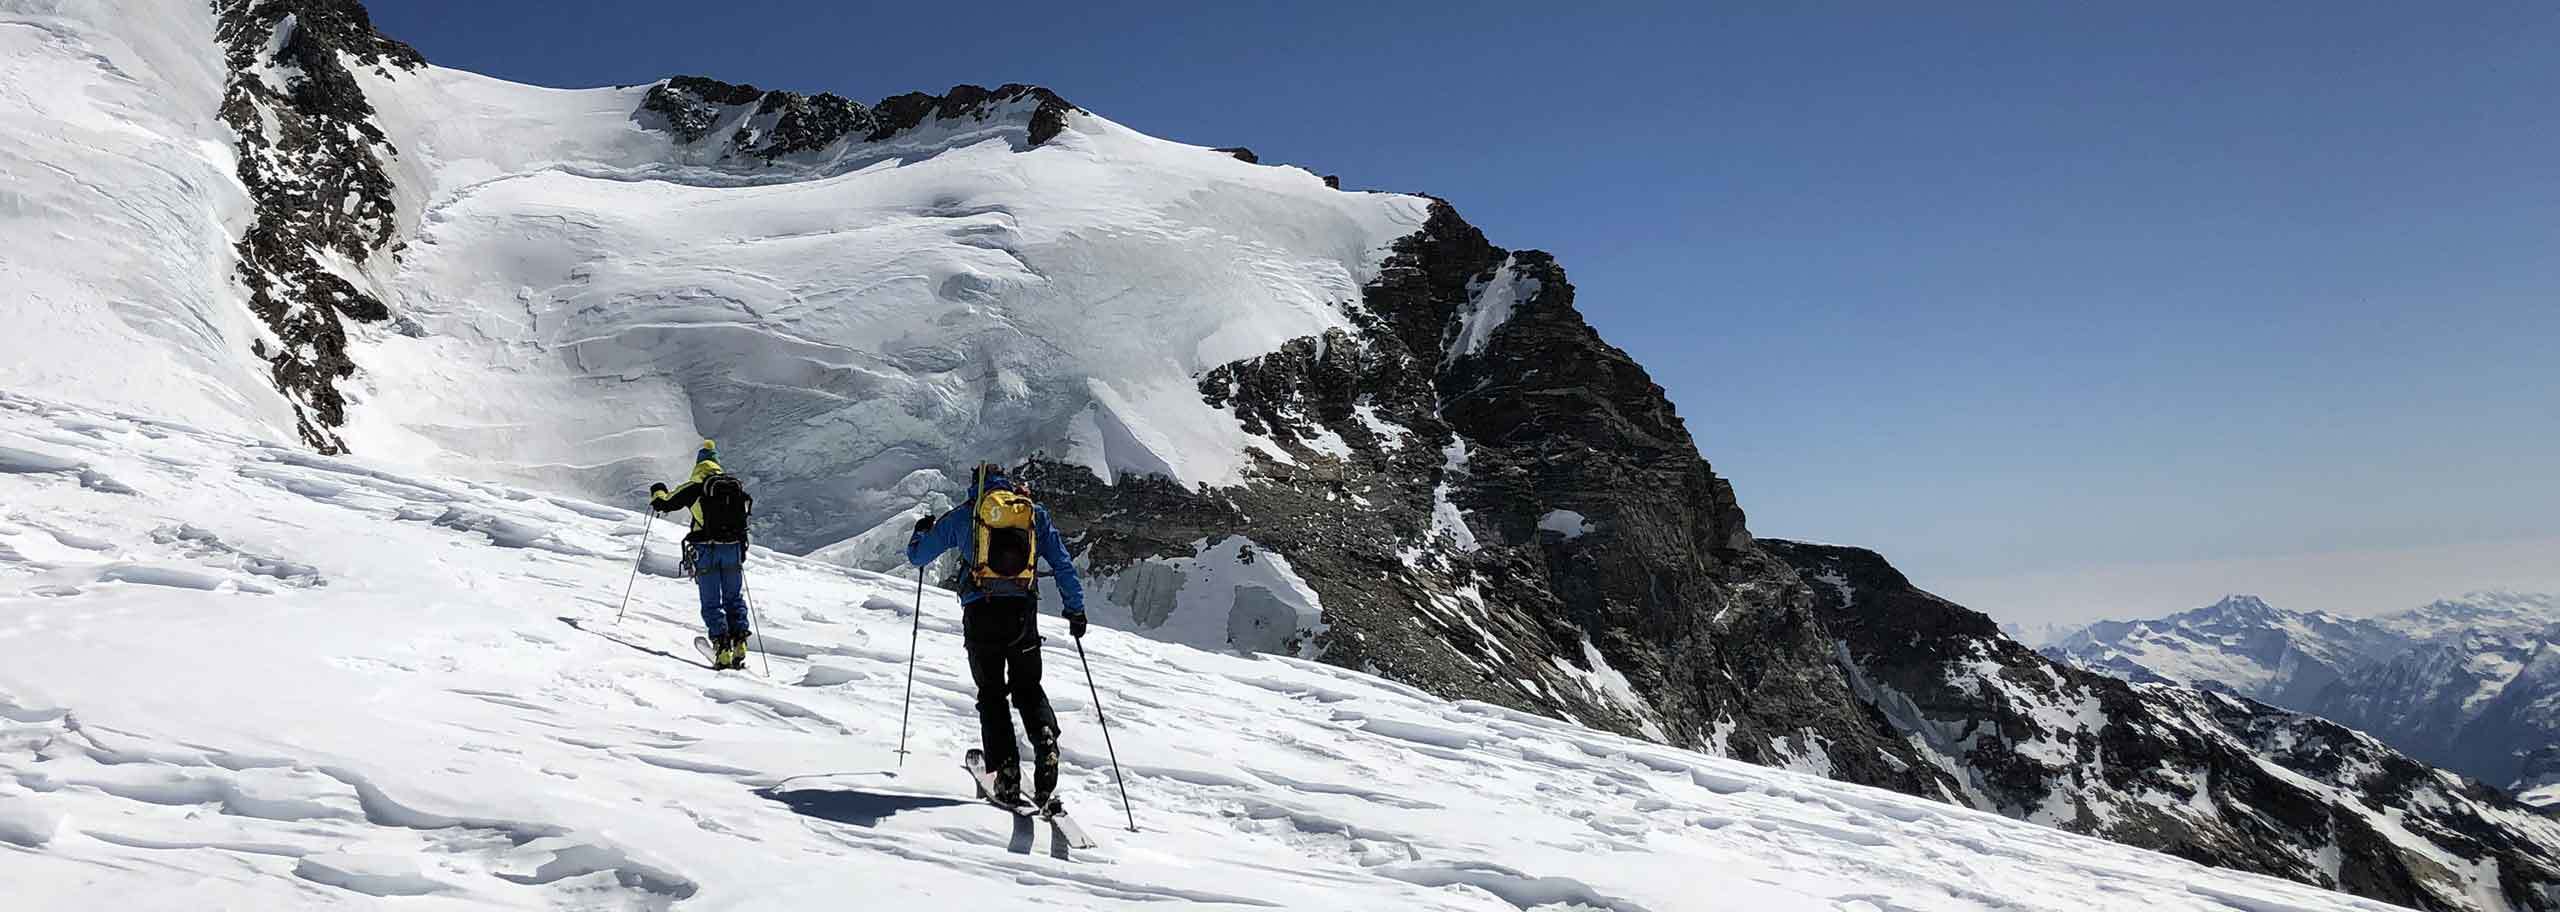 Ski Mountaineering with Mountain Guide in Gressoney, Monte Rosa